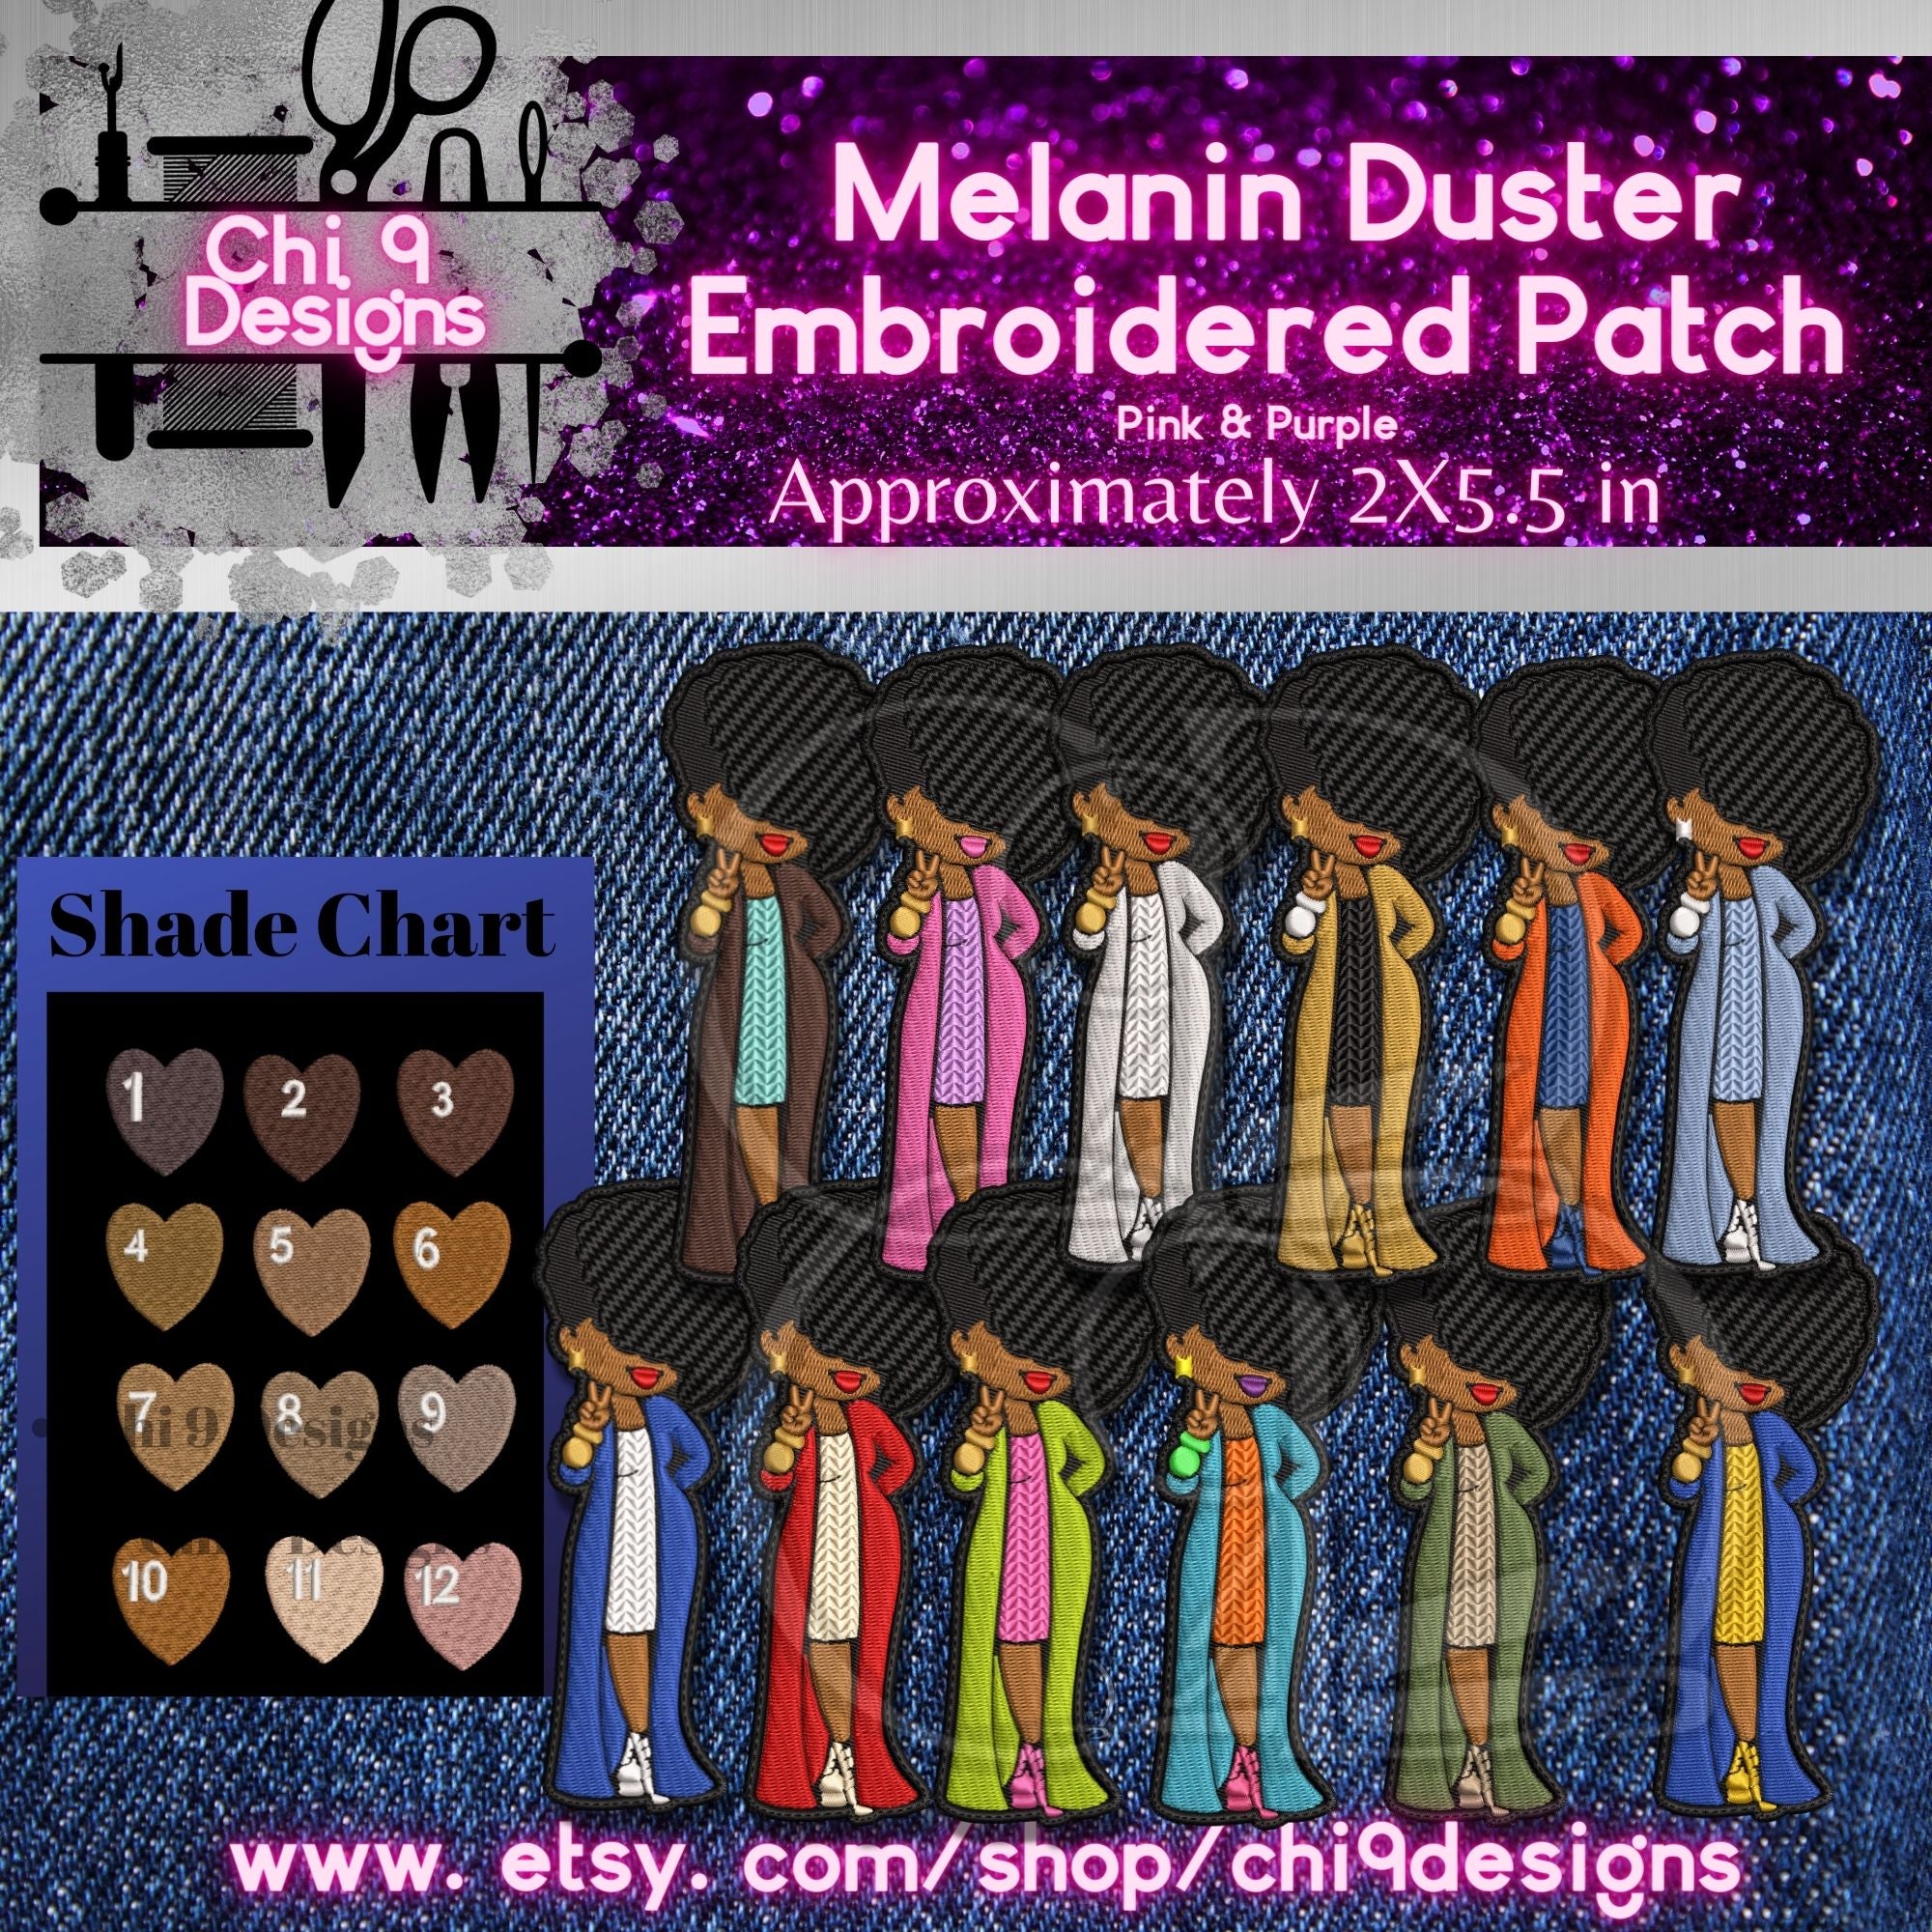 Melanin Duster Embroidered Patch with Red and Cream Clothes